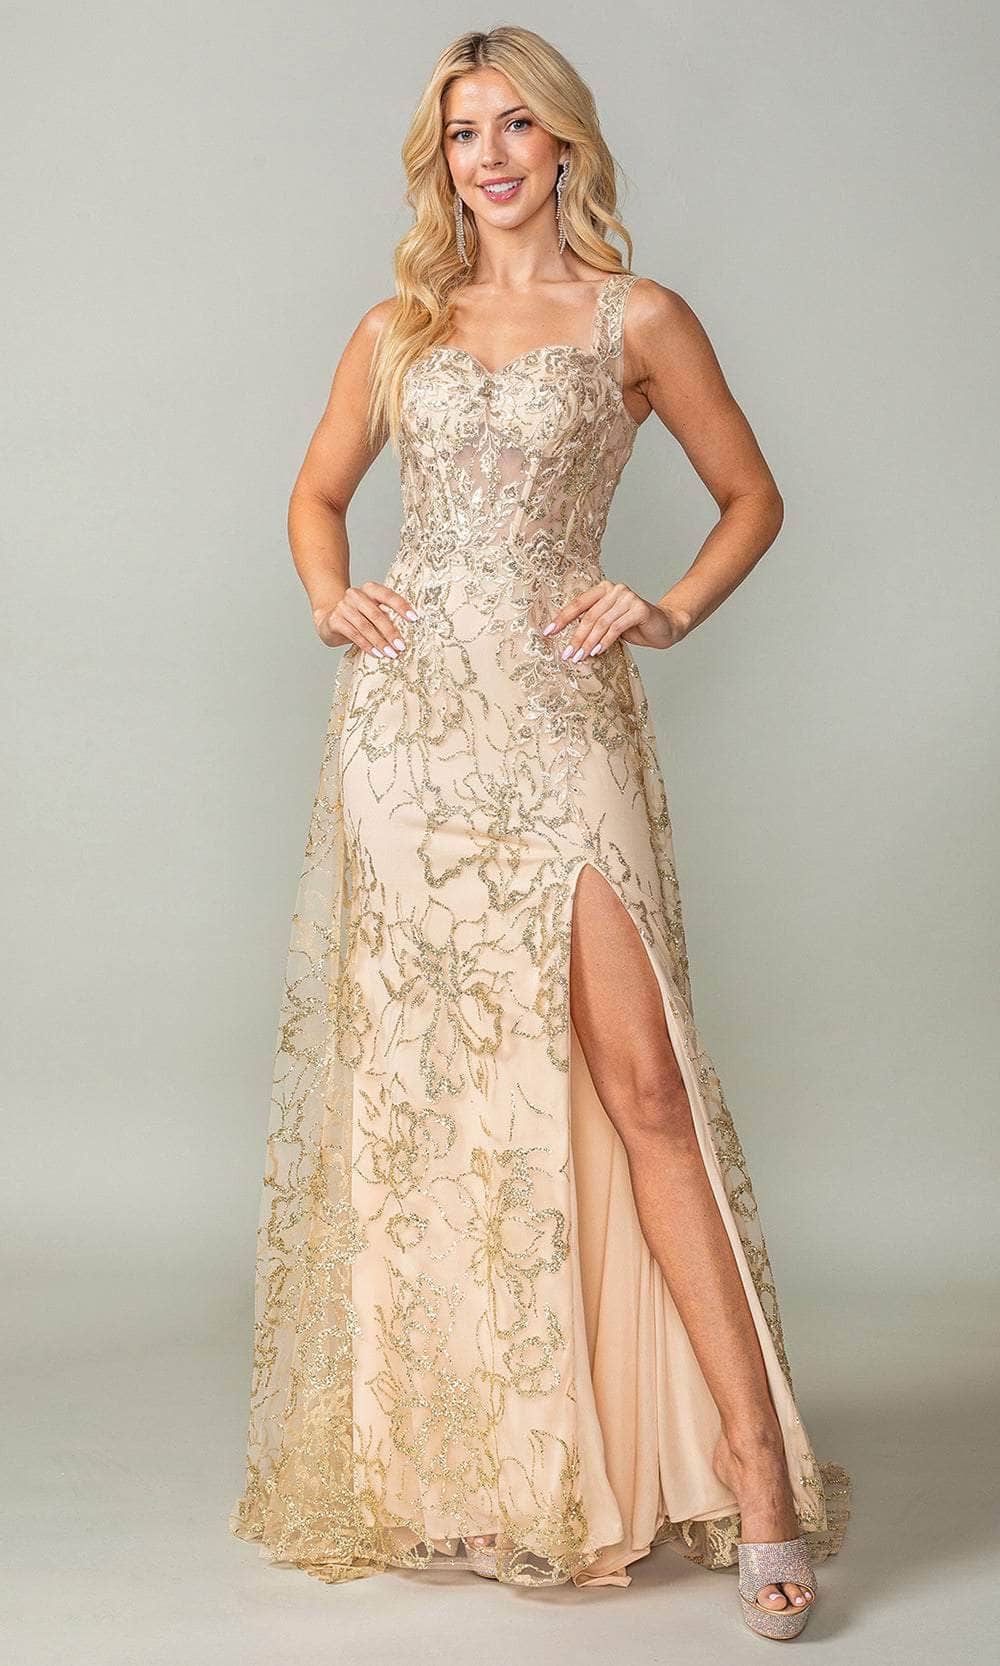 Image of Dancing Queen 4379 - Floral Glitter Print Prom Dress